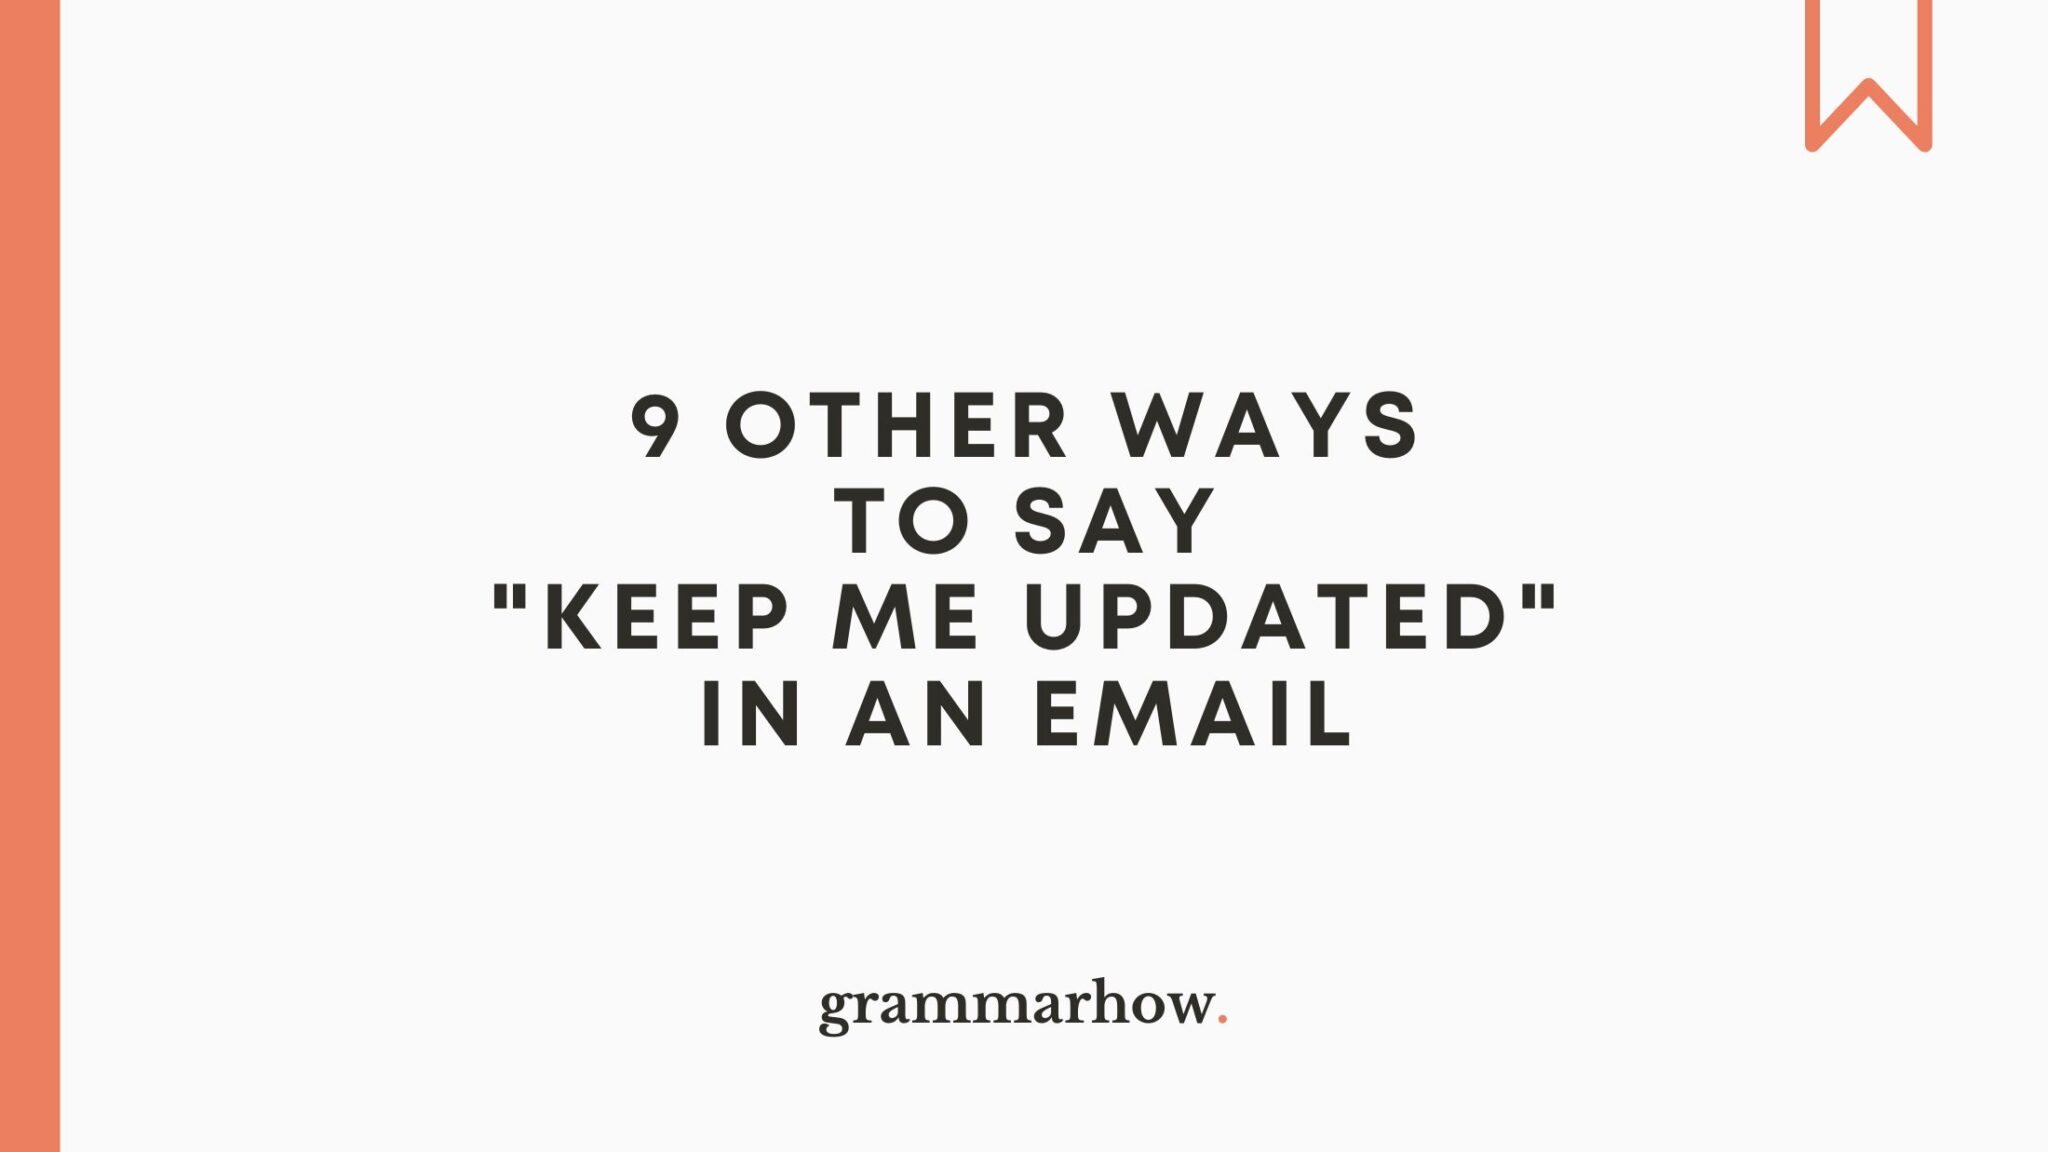 9-other-ways-to-say-keep-me-updated-in-an-email